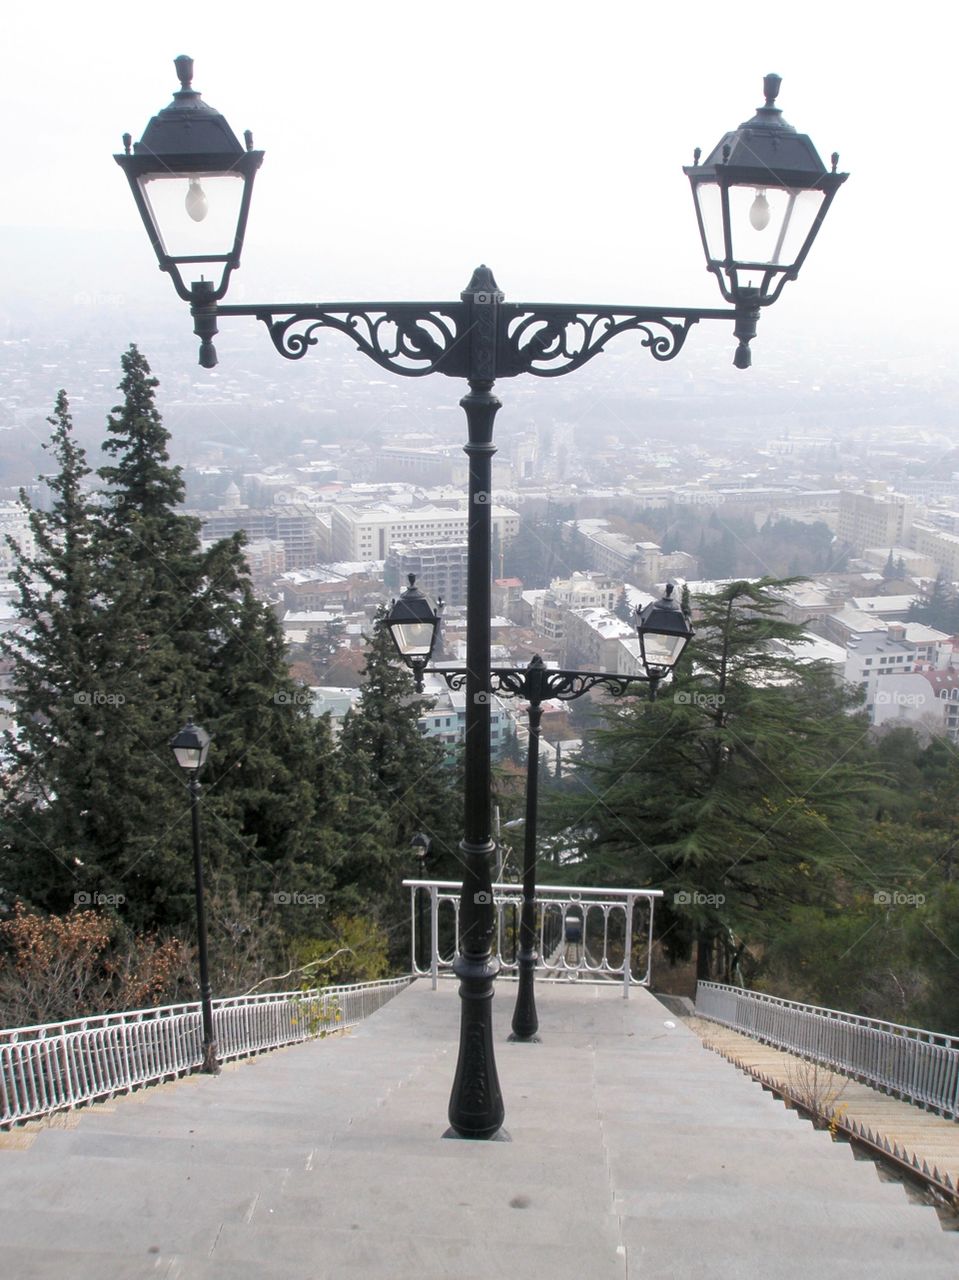 Staircase lamp posts overlooking Tbilisi, Georgia